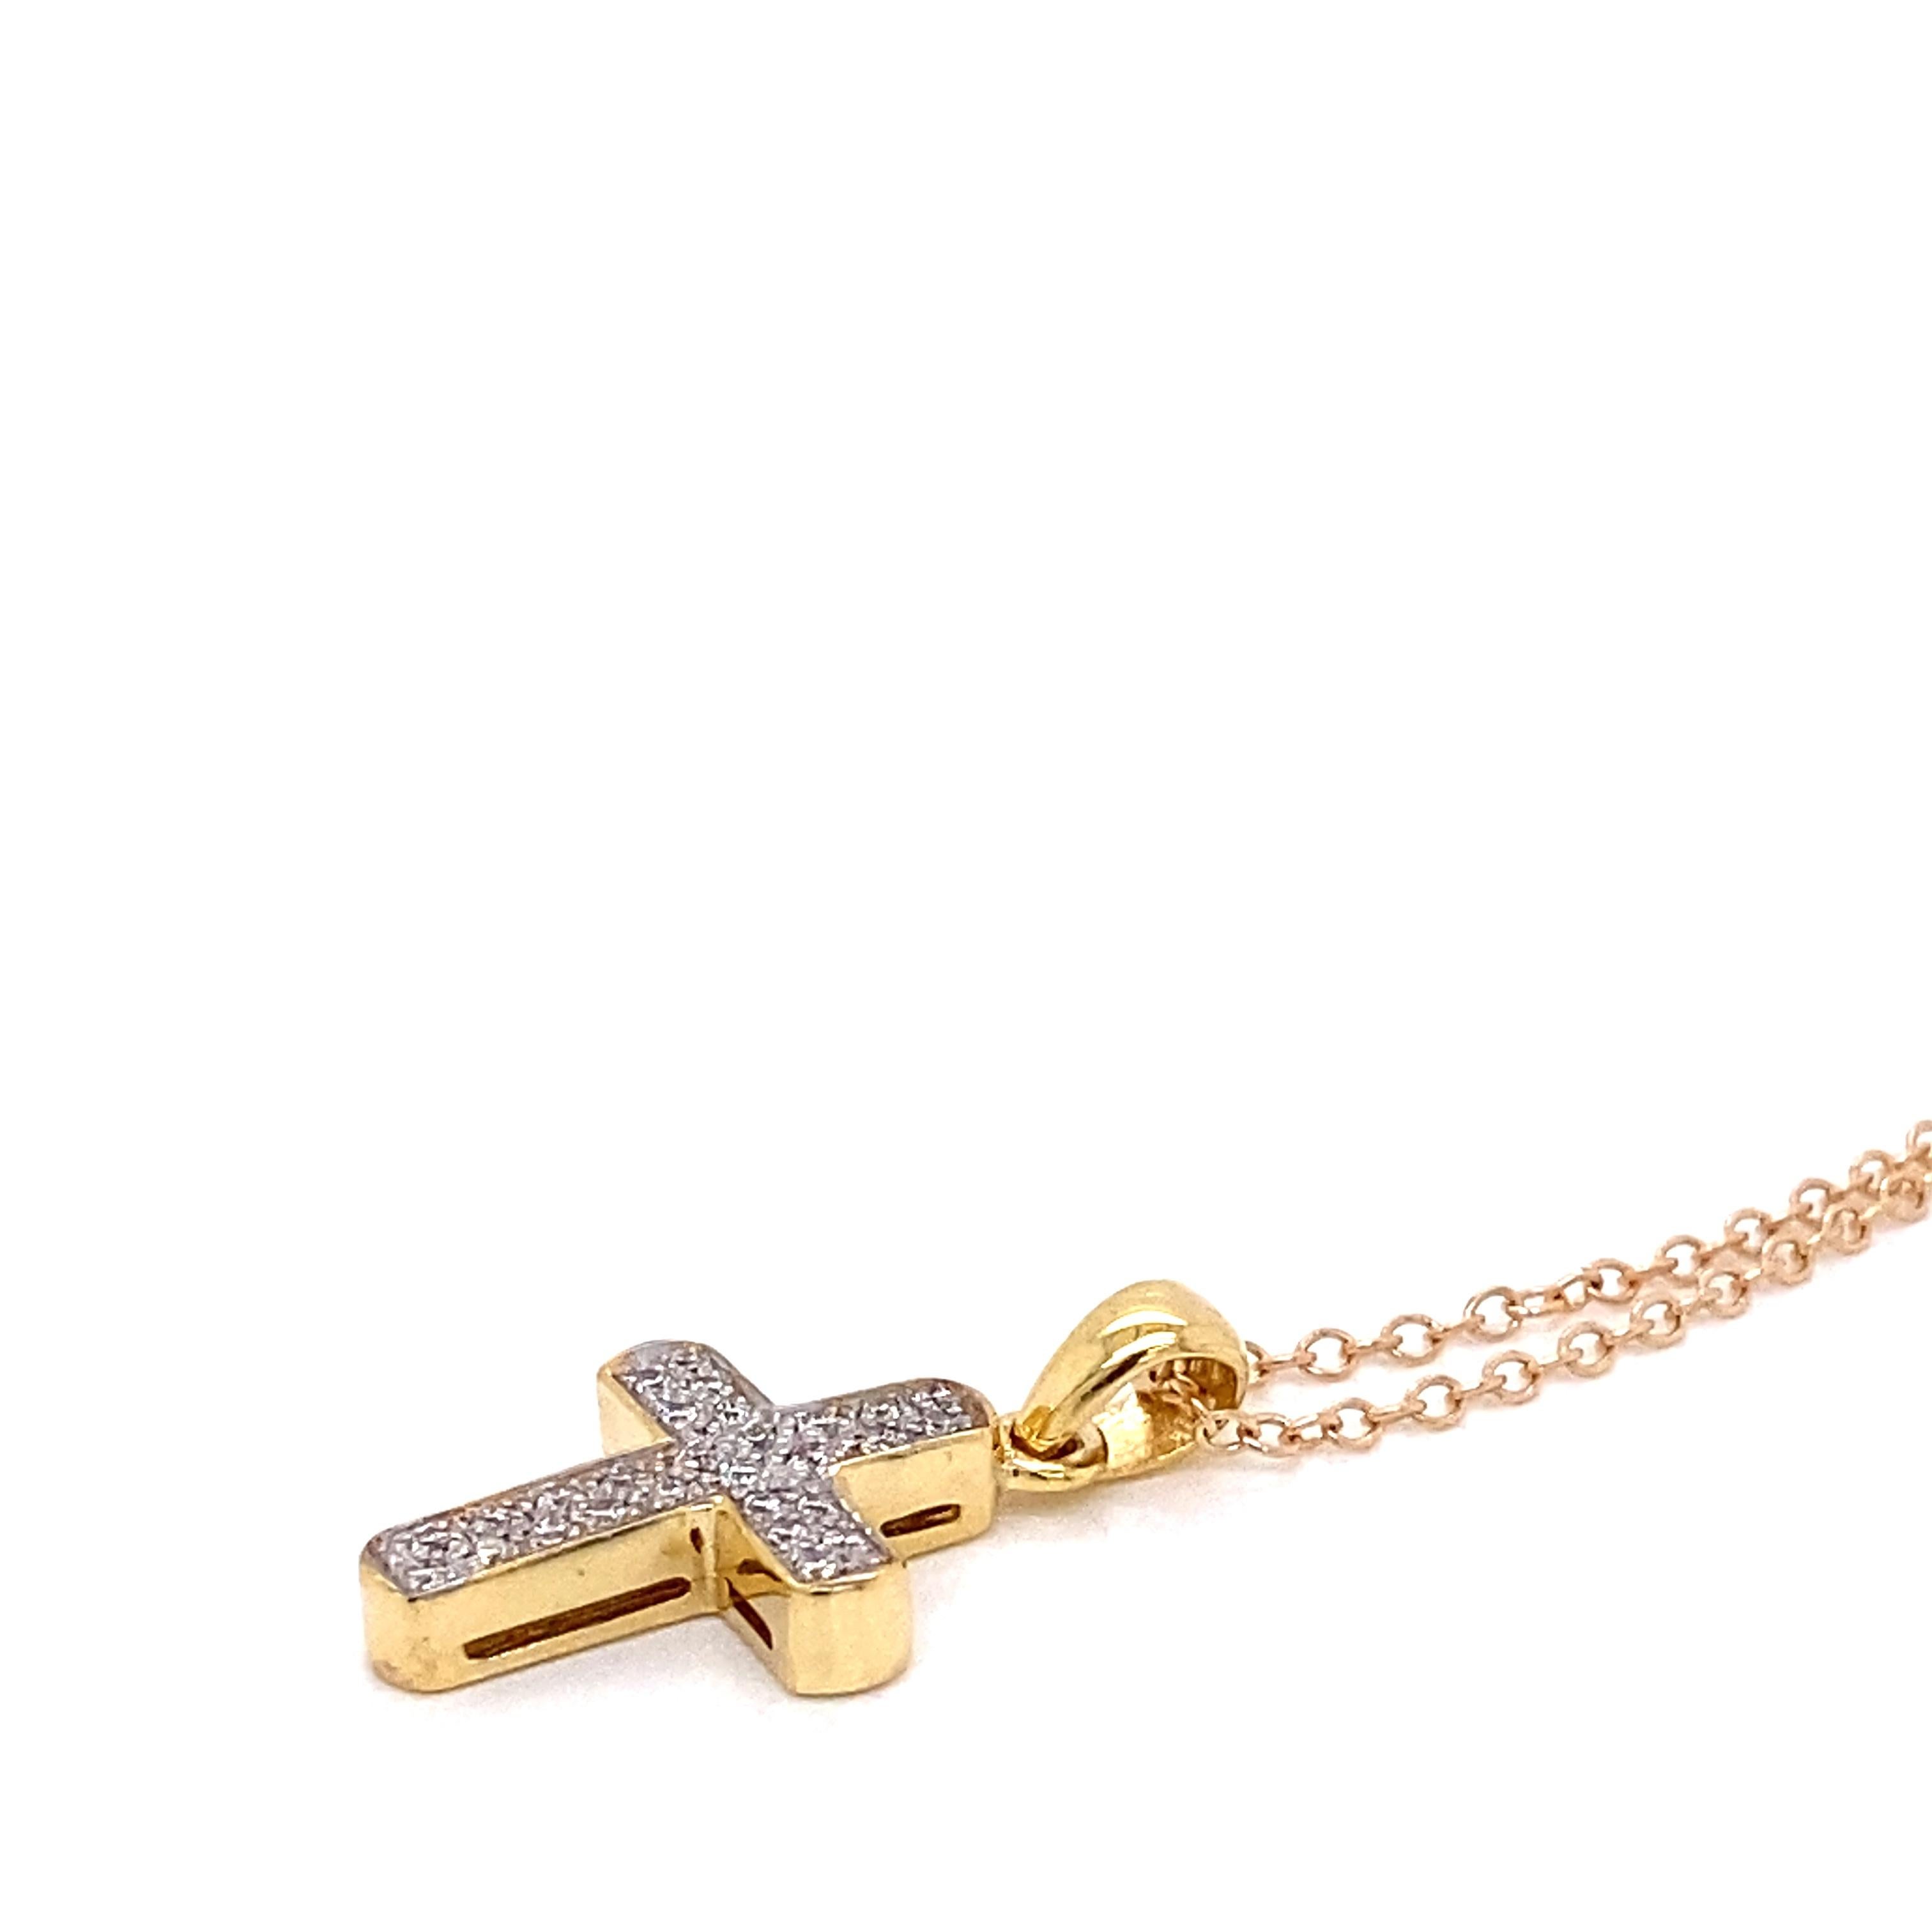 14 Karat Yellow Gold Hand-Crafted Polish-Finished Diamond Cross Pendant, Accented with 0.14 Carats of Pave Set Diamonds, Sliding on a 16